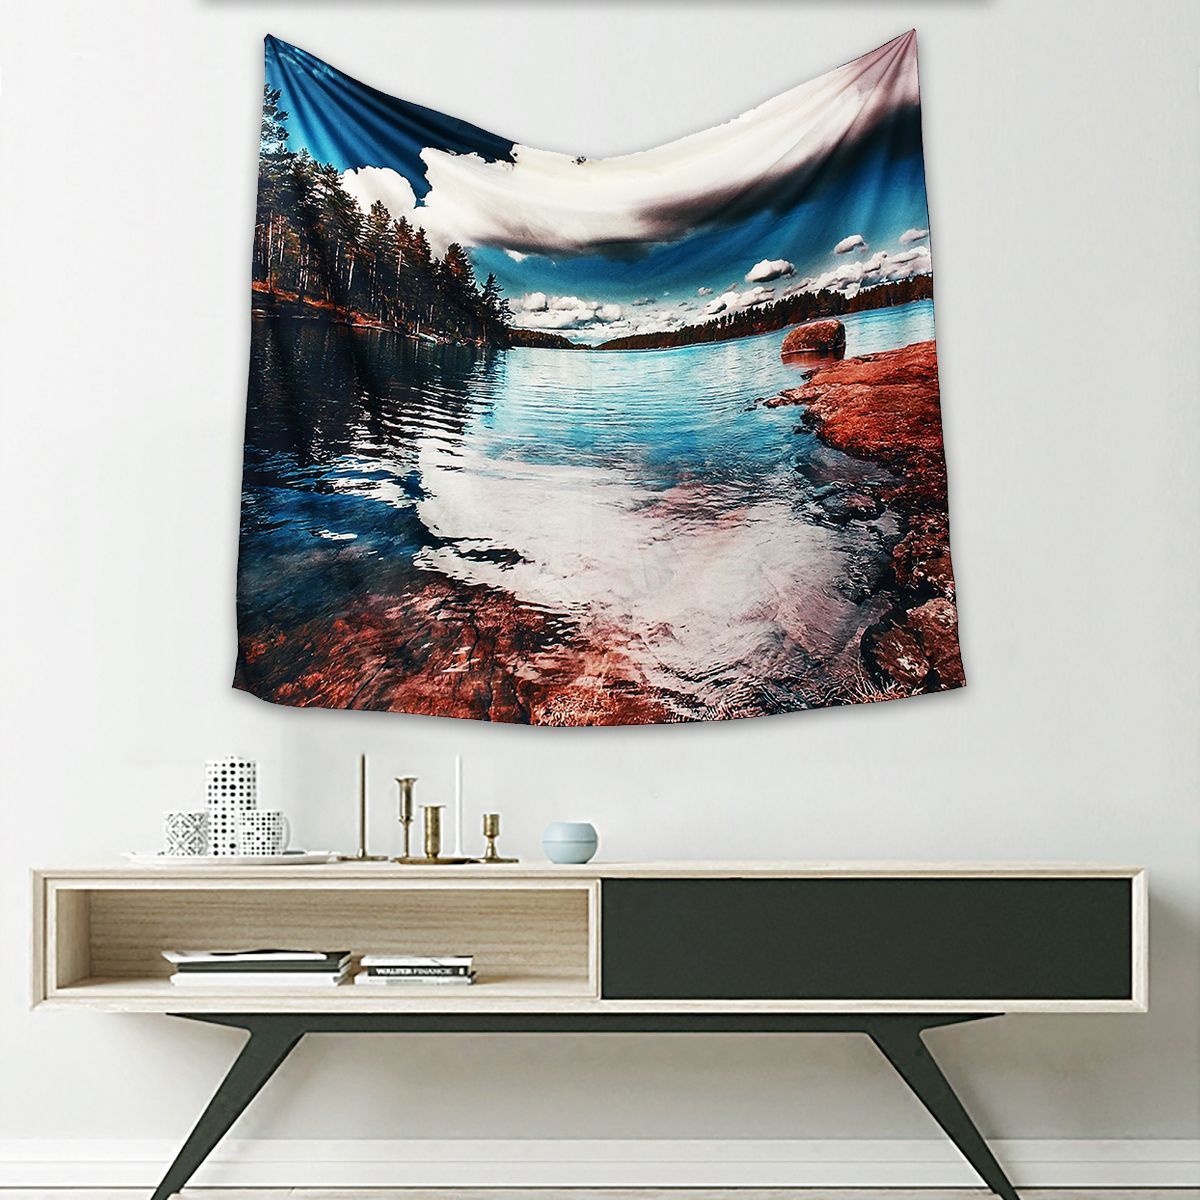 Forest-World-Map-Tapestries-Wall-Hanging-Paper-Tapestry-Bedspread-Dorm-Decor-1436138